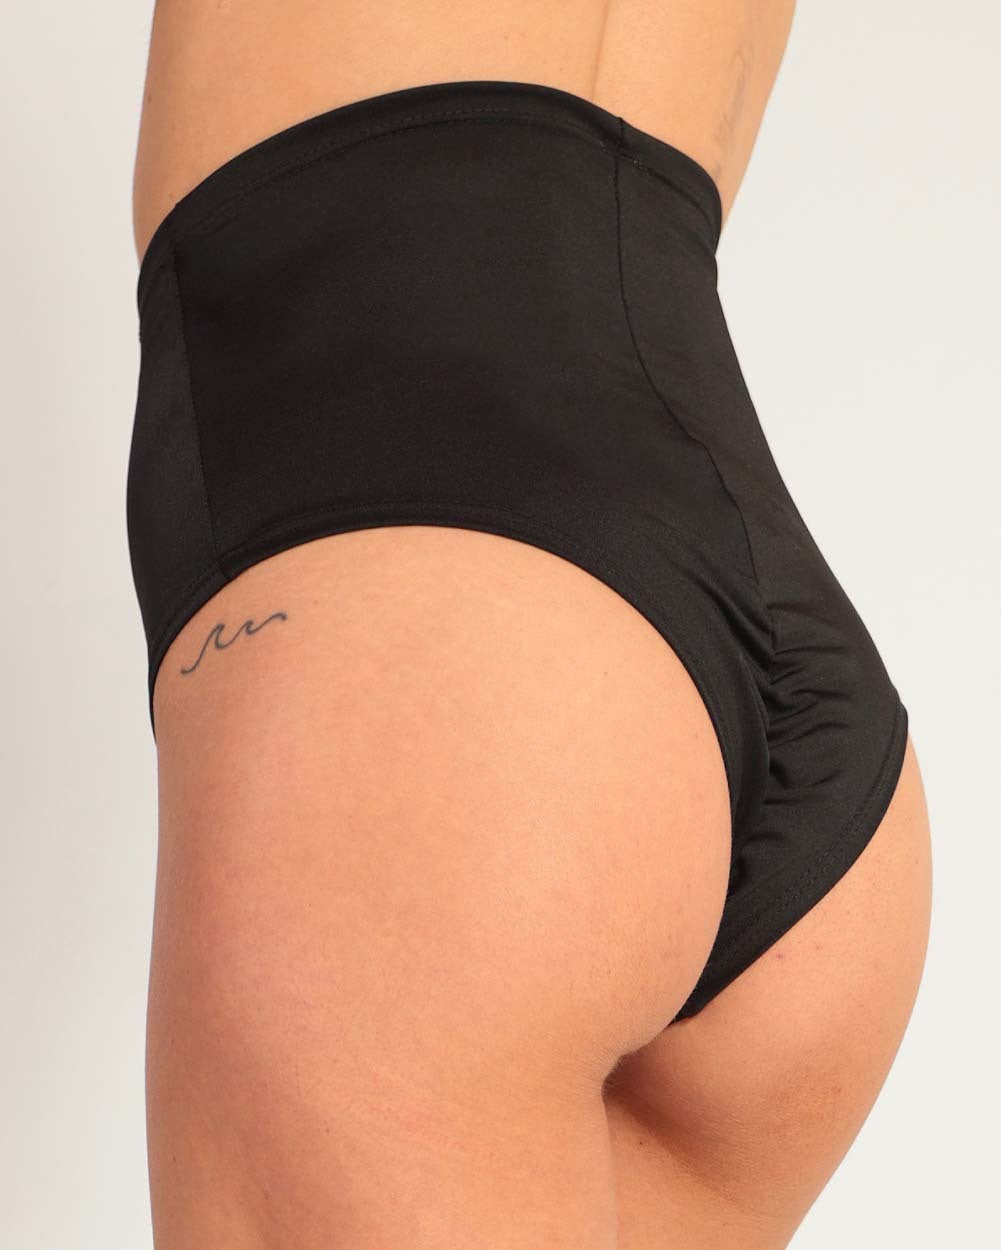 Tosmy Women High Waisted Booty Shorts with Garter Belts Elastic